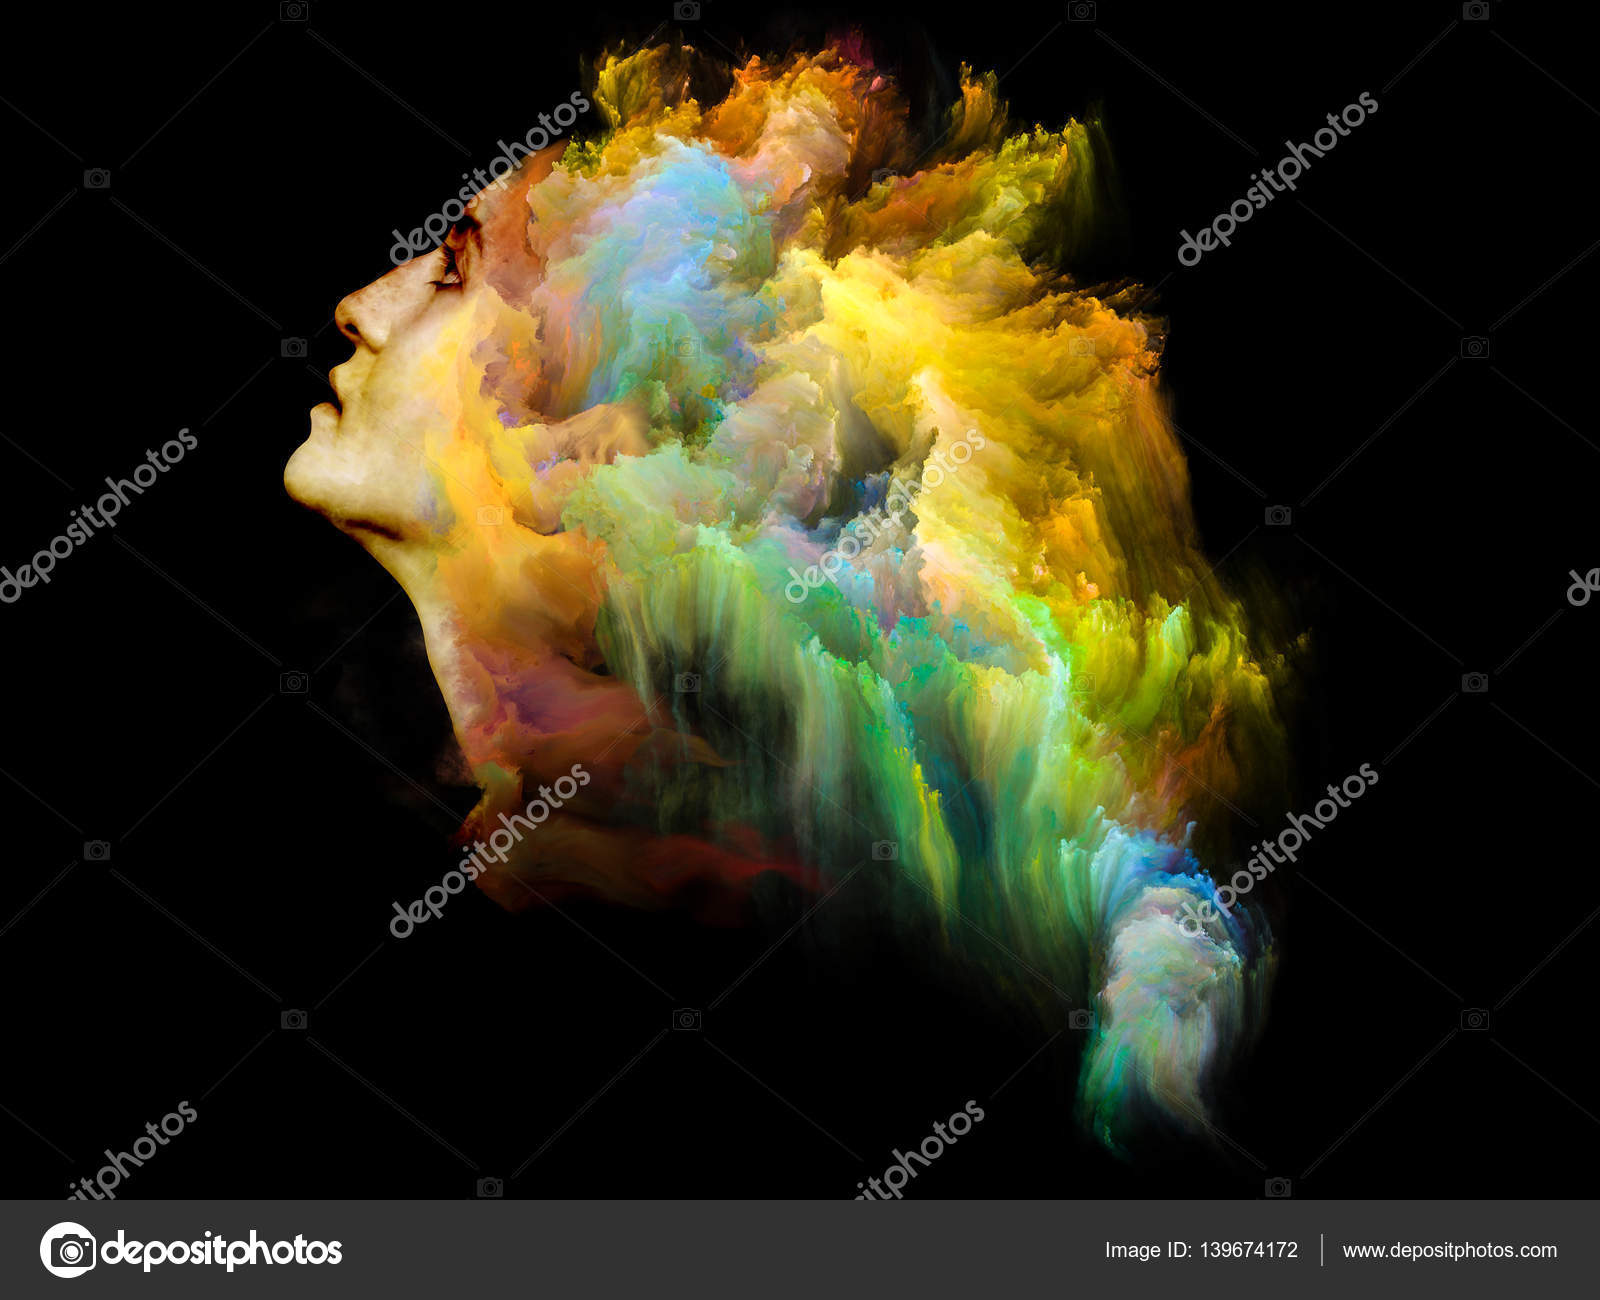 Separation of Dreams concept — Stock Photo © agsandrew #139674172